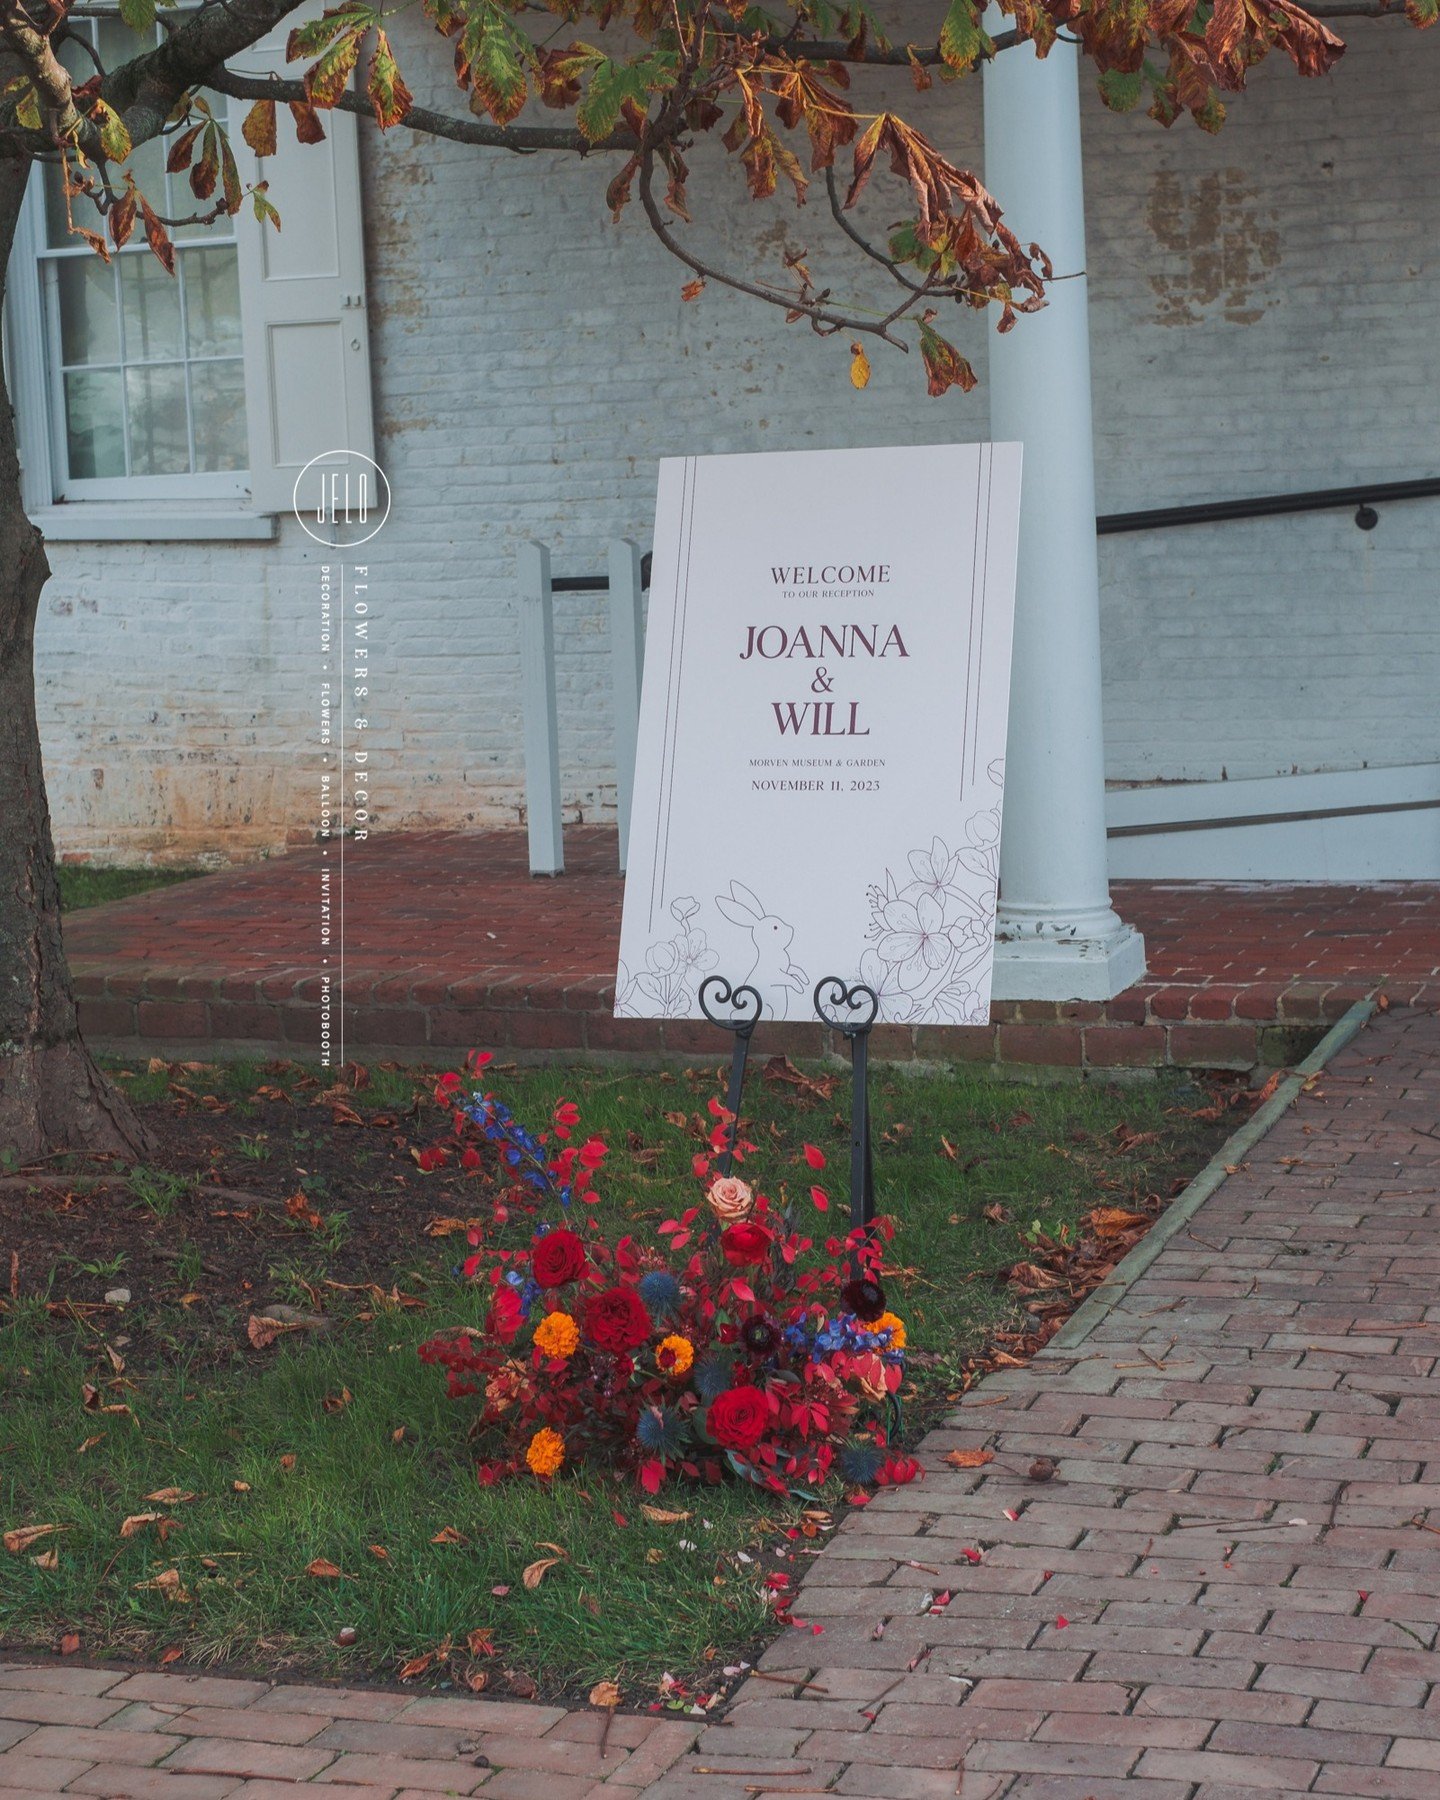 Fall wedding with our fresh flower signage decor.

.
.
.

Event : Joanna + Will's Wedding
Planning : @genesiswedding
Flowers &amp; Decor : @jeloflowersdecor
Venue : @morvenmuseum